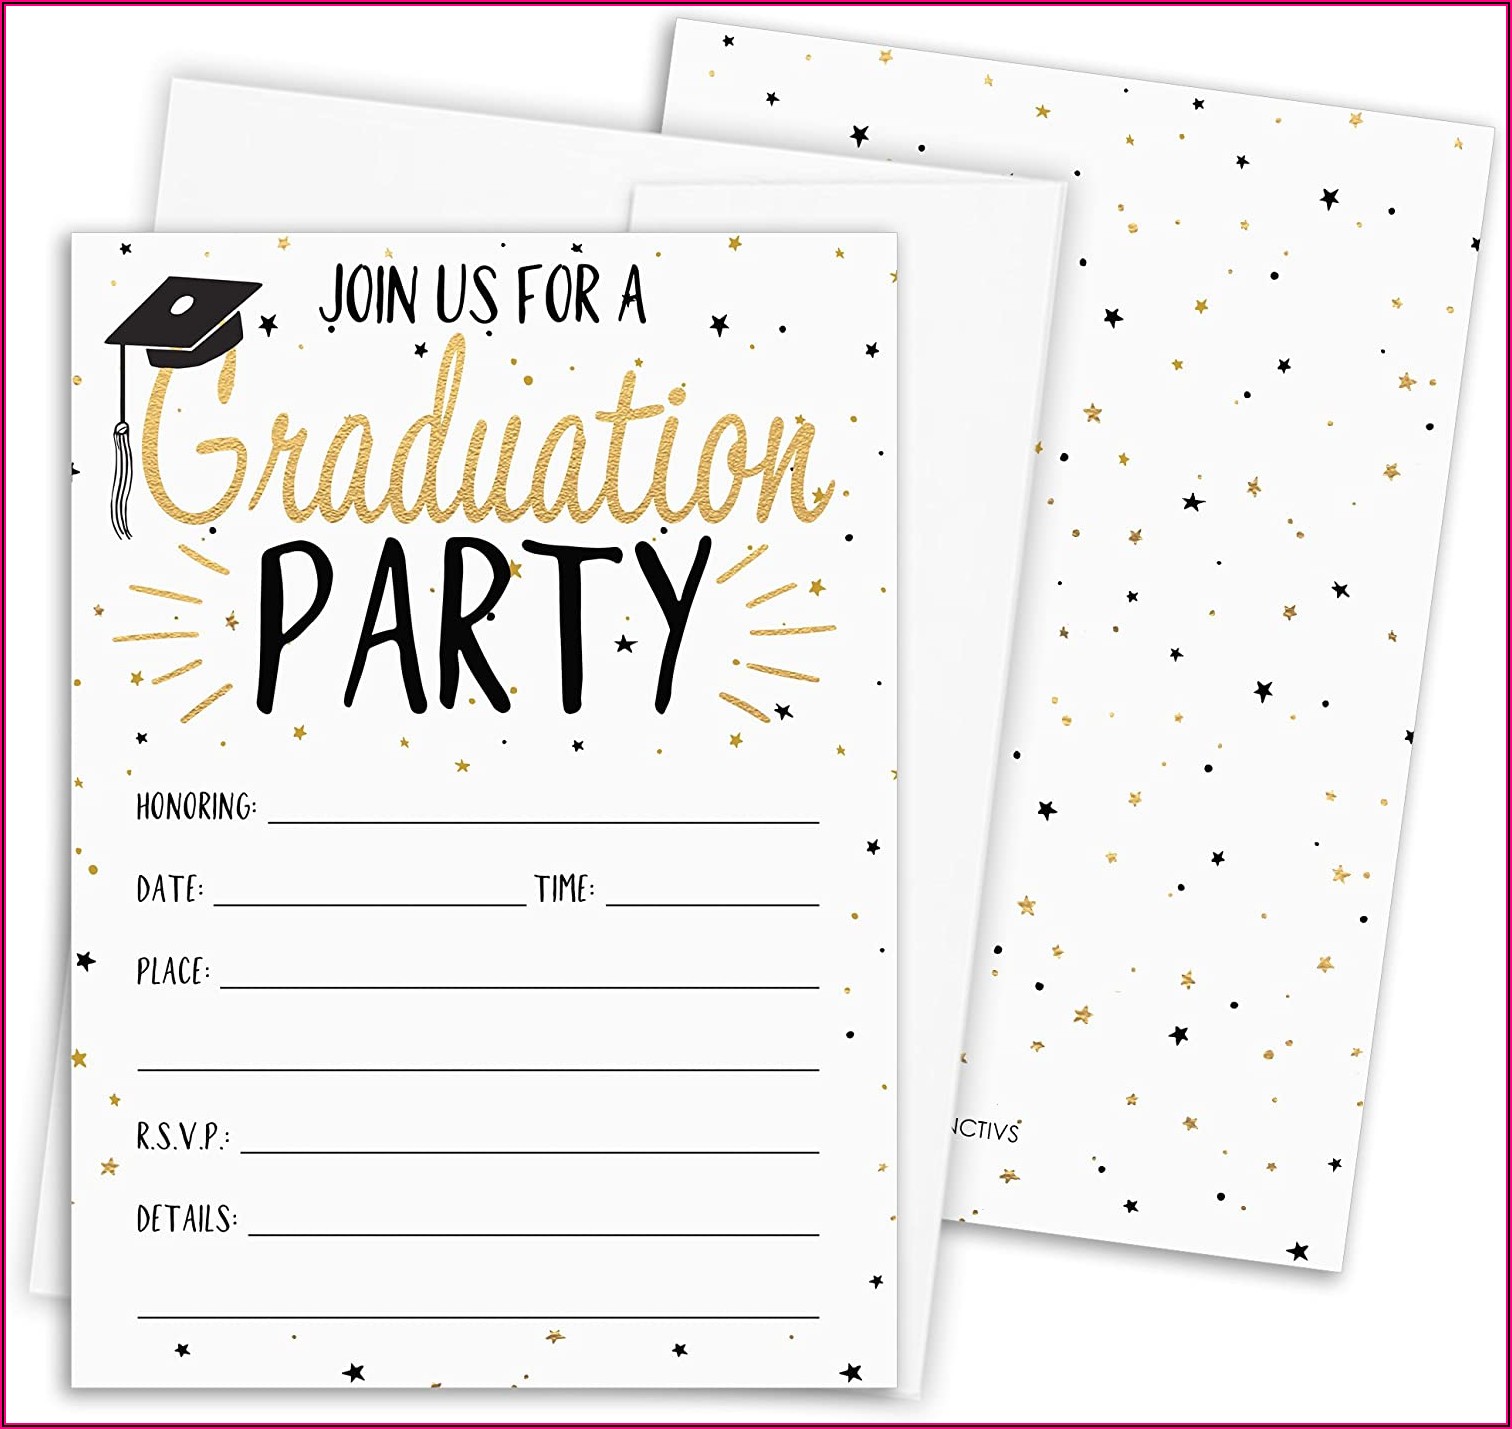 Graduation Announcements Fast Delivery